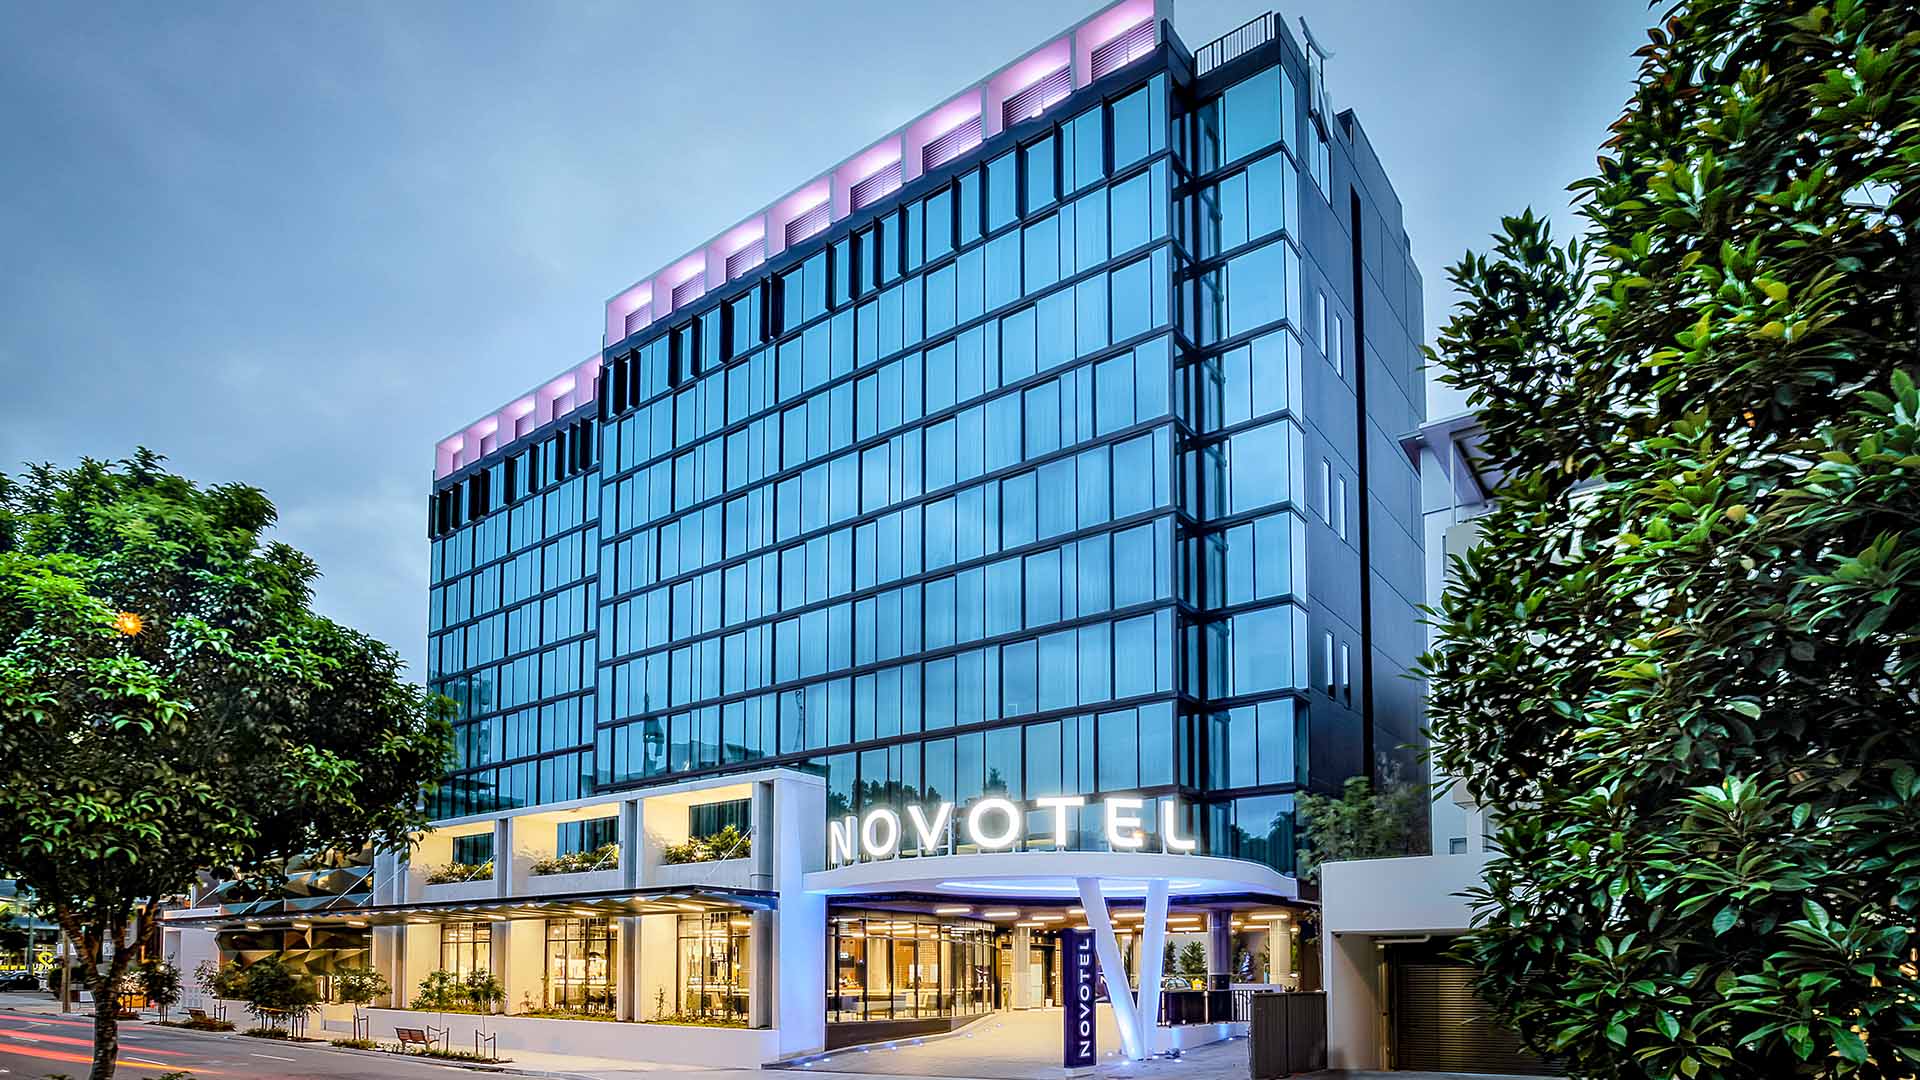 Brisbane's Newest Luxe Hotel Is Novotel South Bank